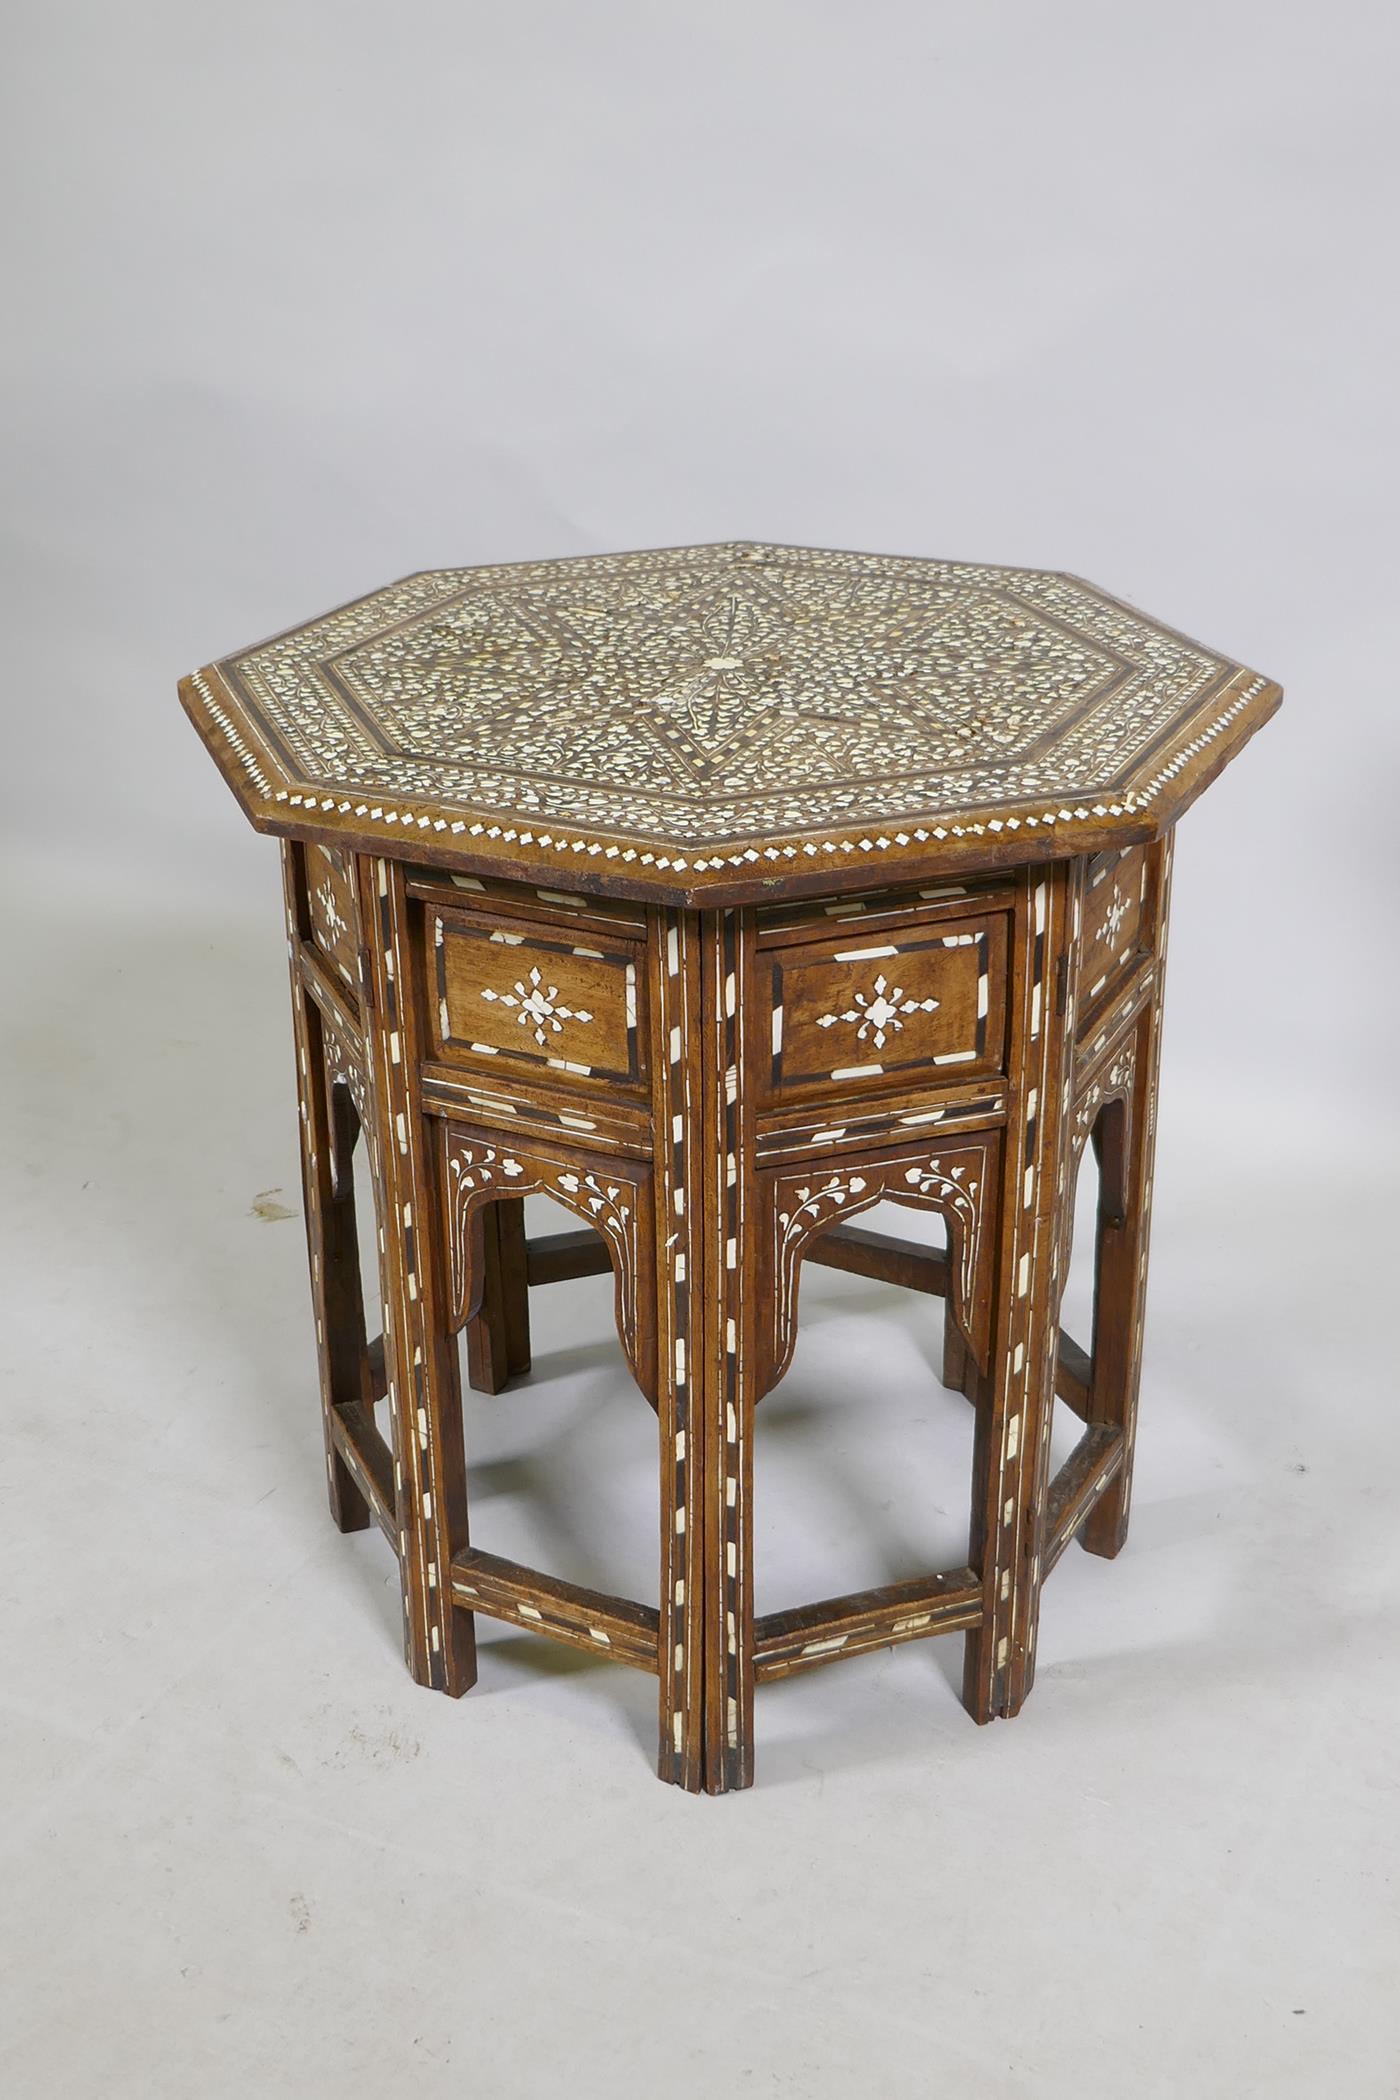 A C19th Anglo Indian bone and ebony inlaid rosewood Hoshiarpur table, AF repairs to inlay, 46 x - Image 3 of 8